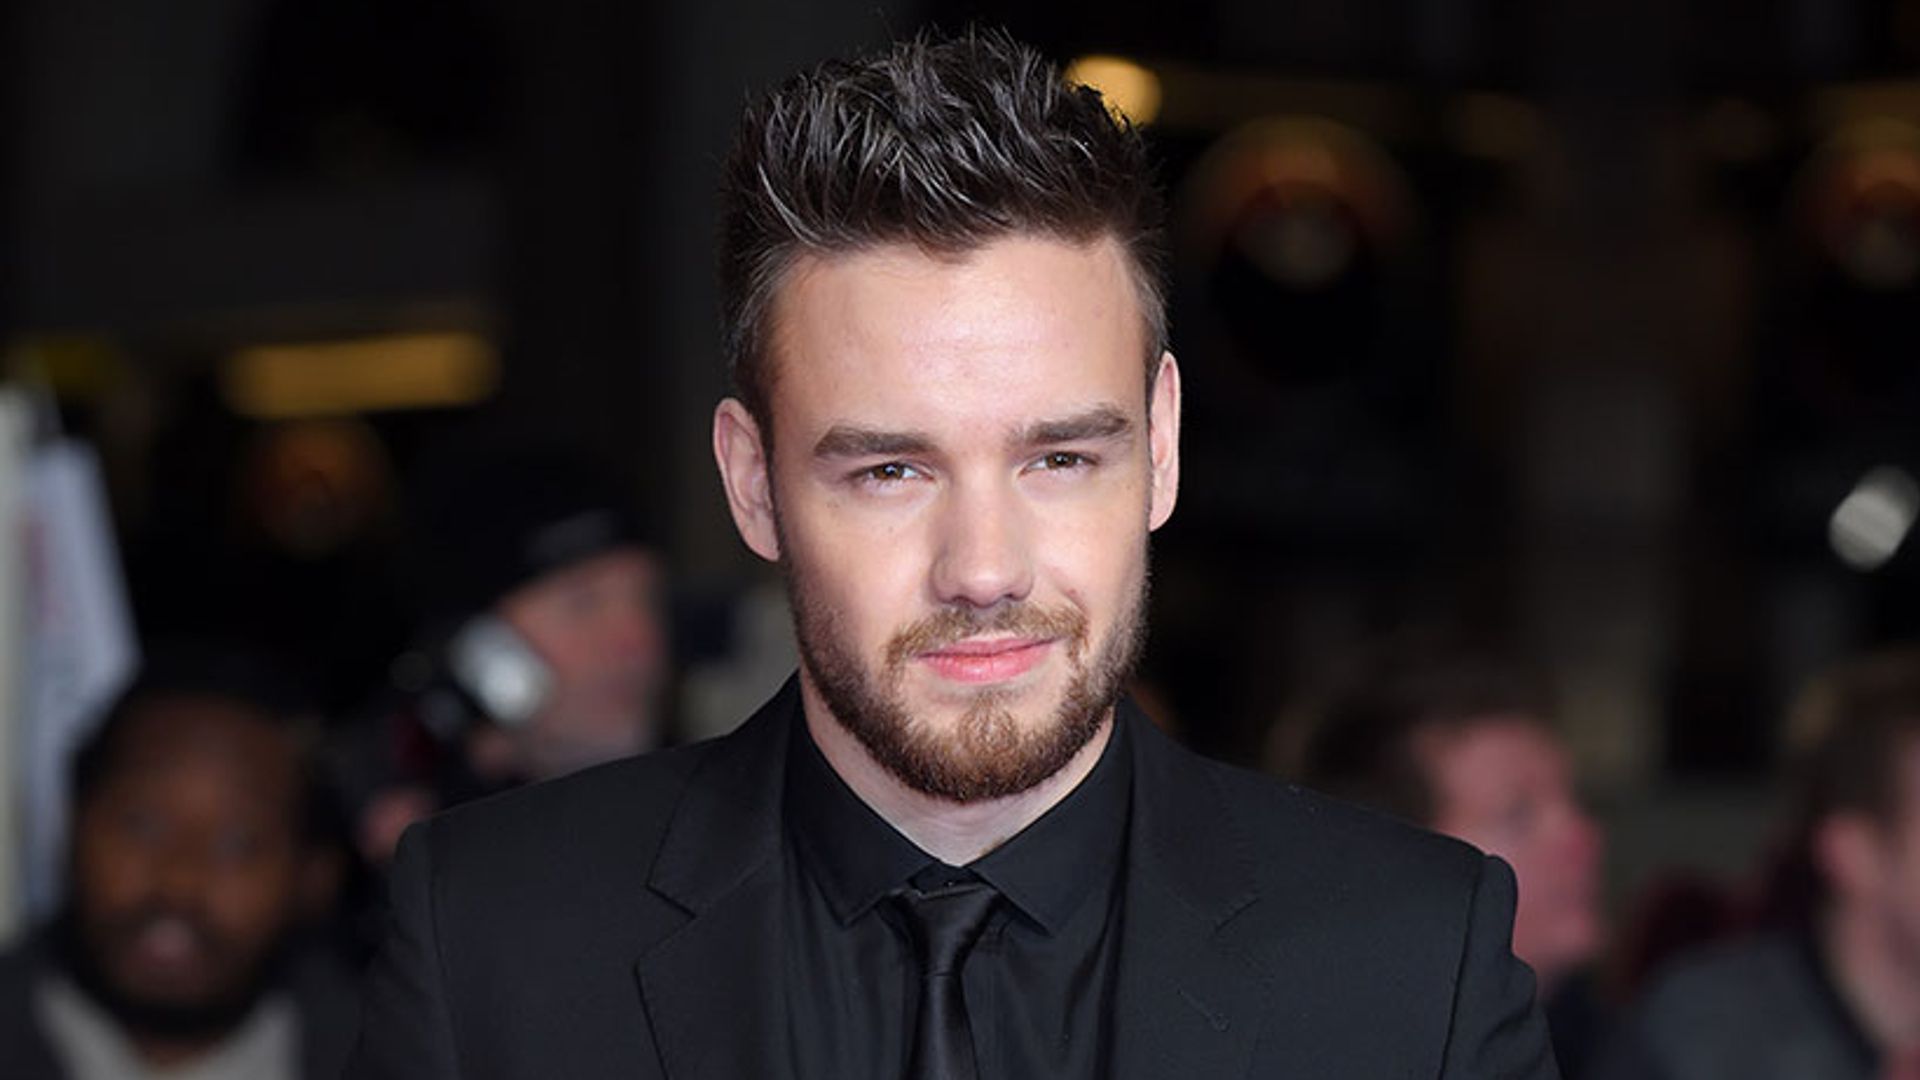 Liam Payne’s ex-girlfriend Sophia Smith congratulates him on becoming a father